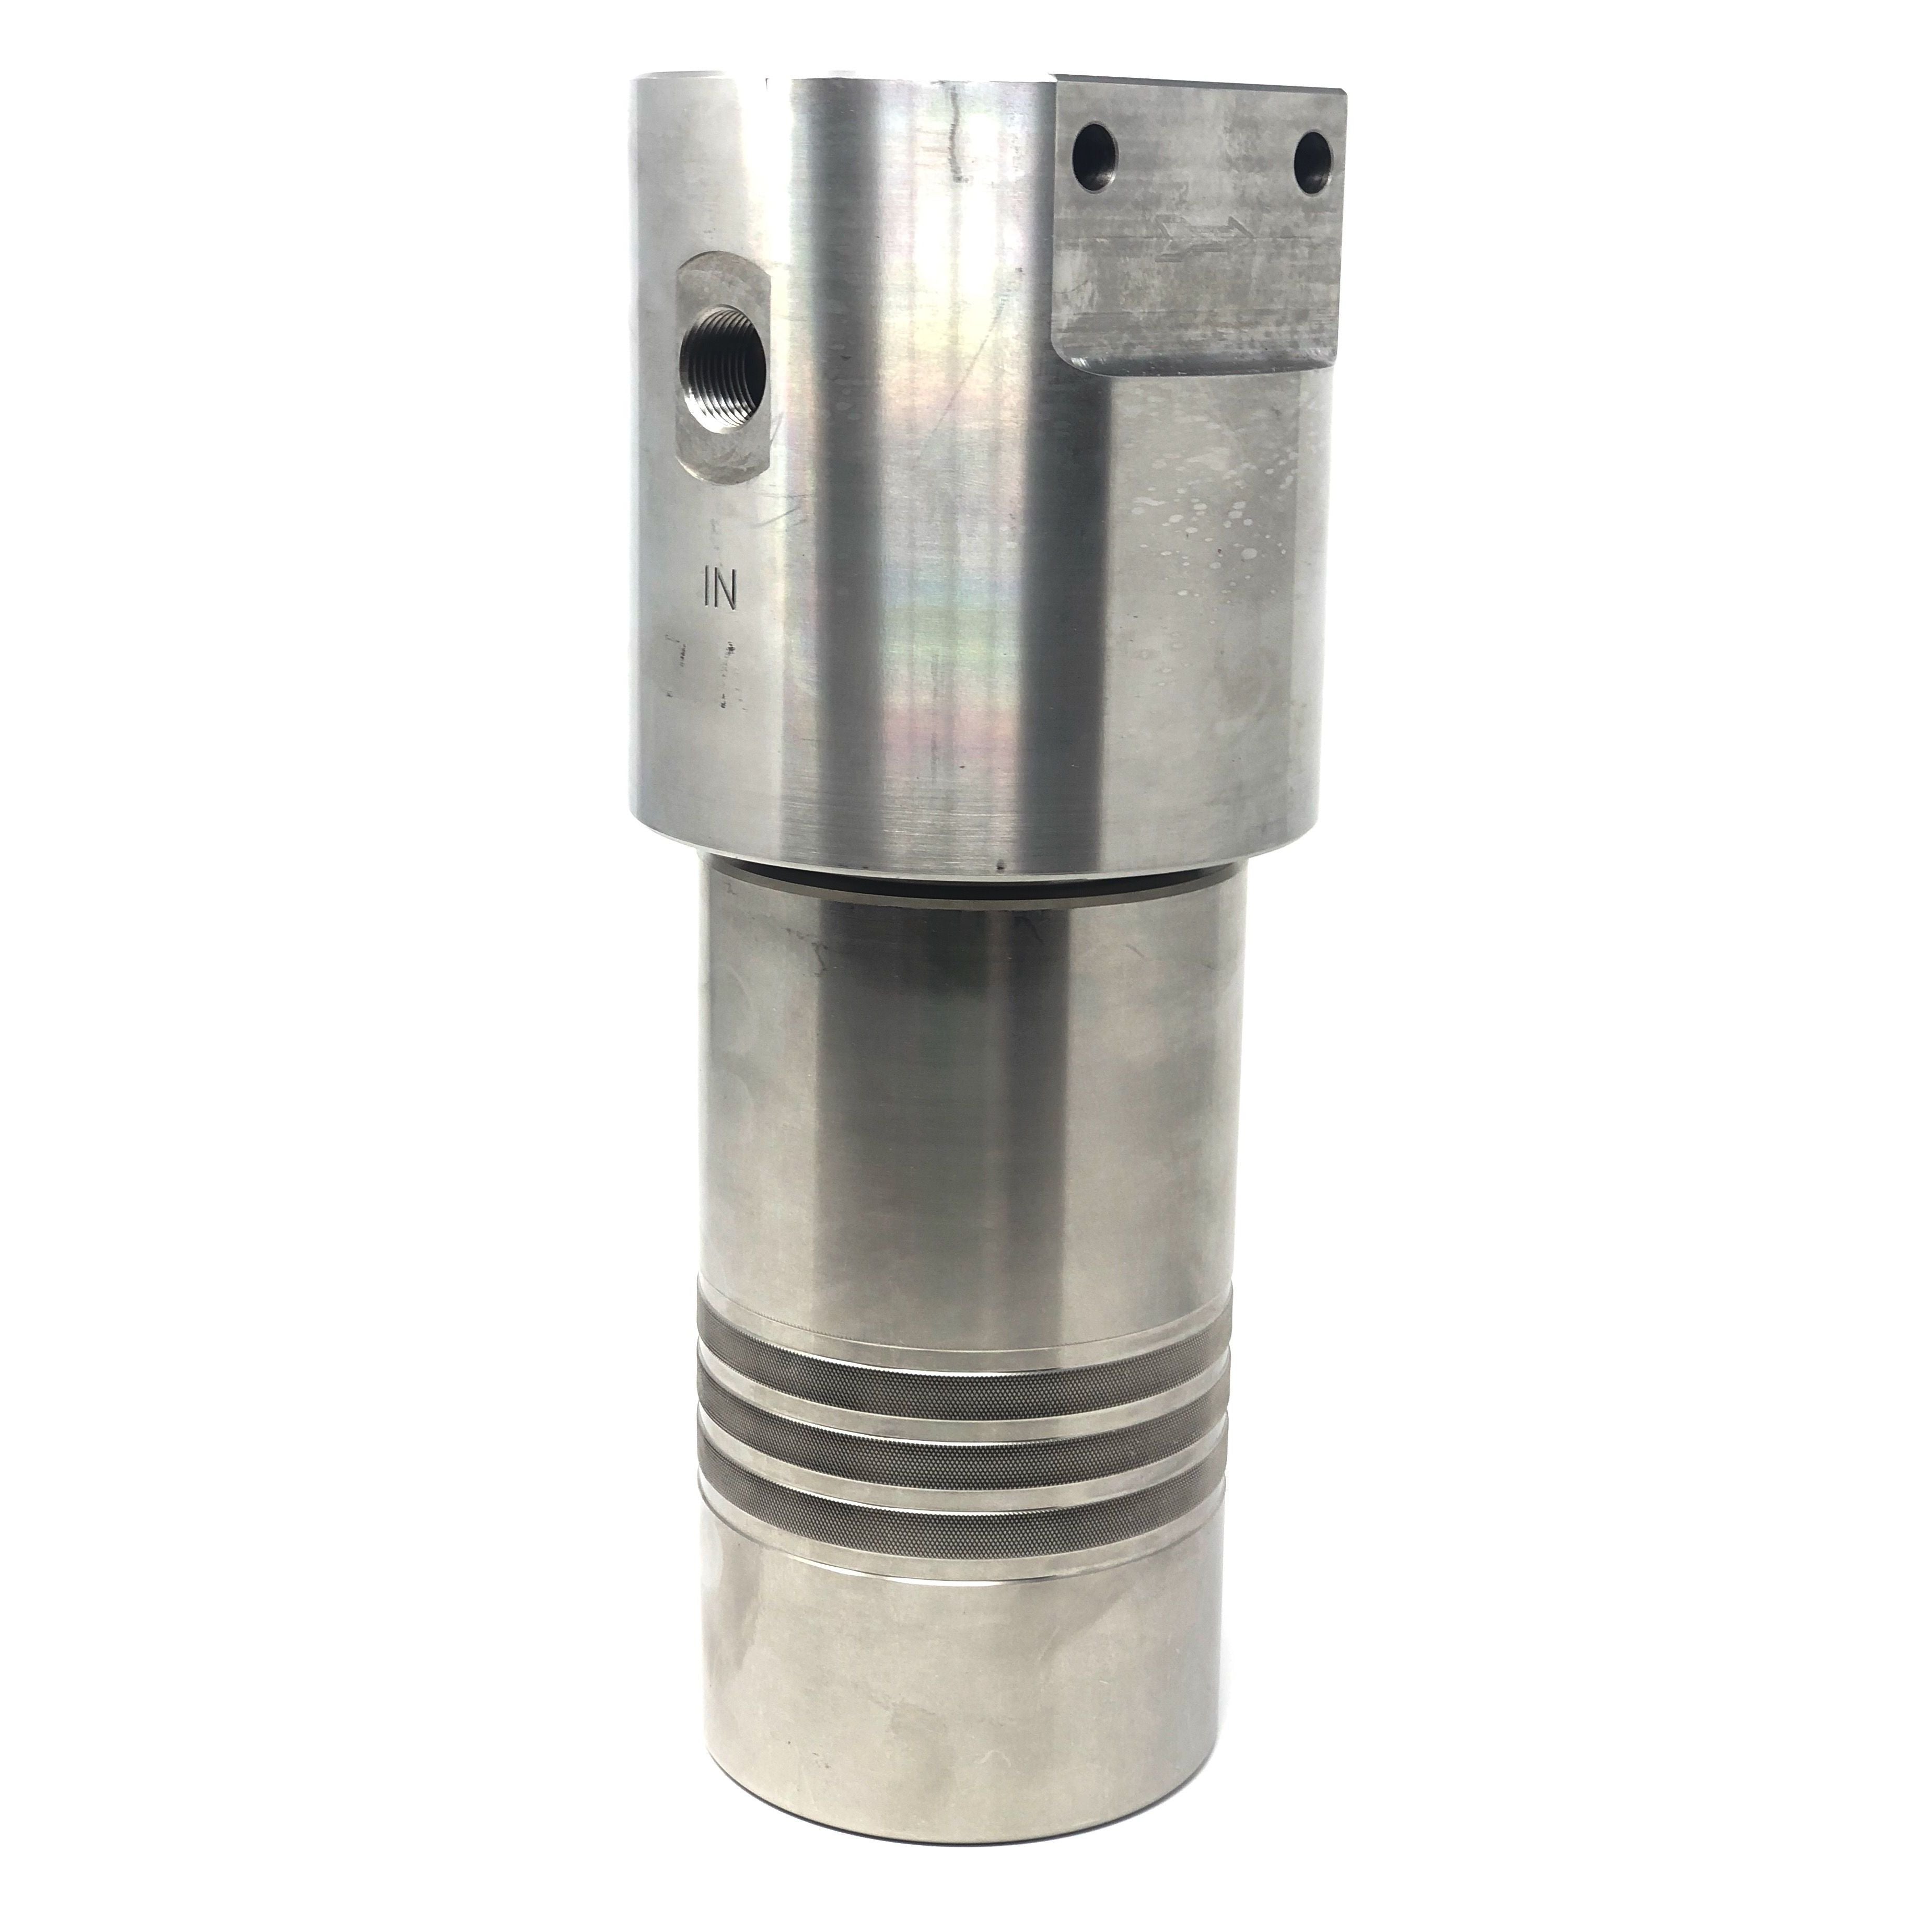 52S-244N-12MDN : Chase Ultra High Pressure Inline Filter, 10000psi, 1/4" NPT, 12 Micron, With Visual Indicator, No Bypass